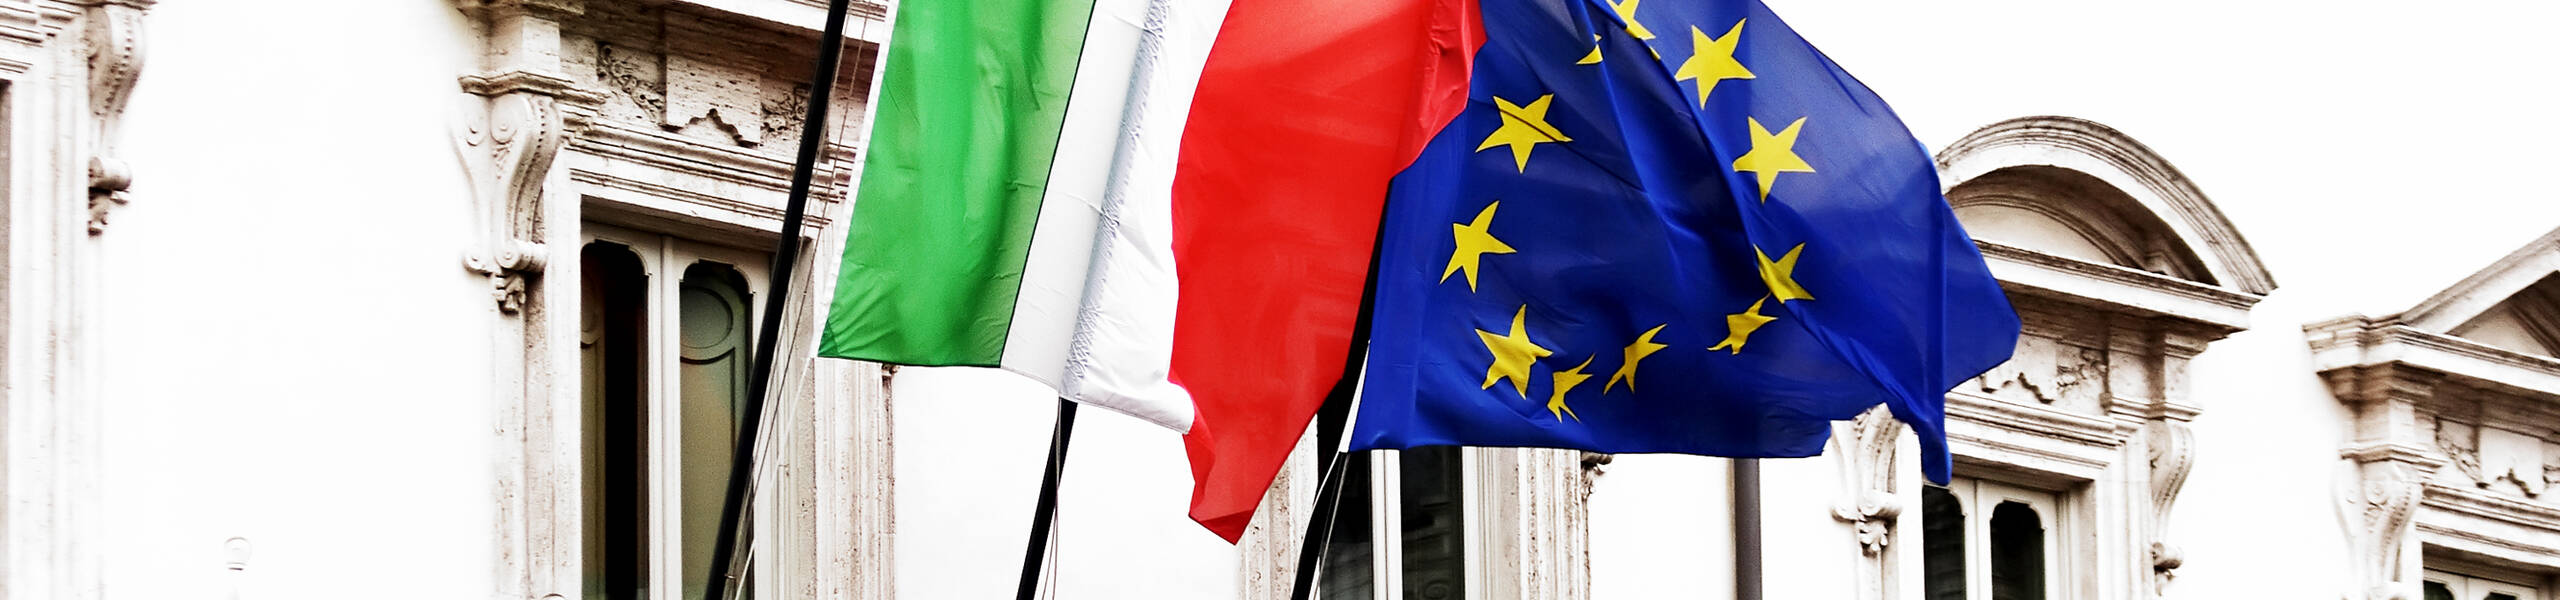 Will the euro change its direction after the Italian elections?